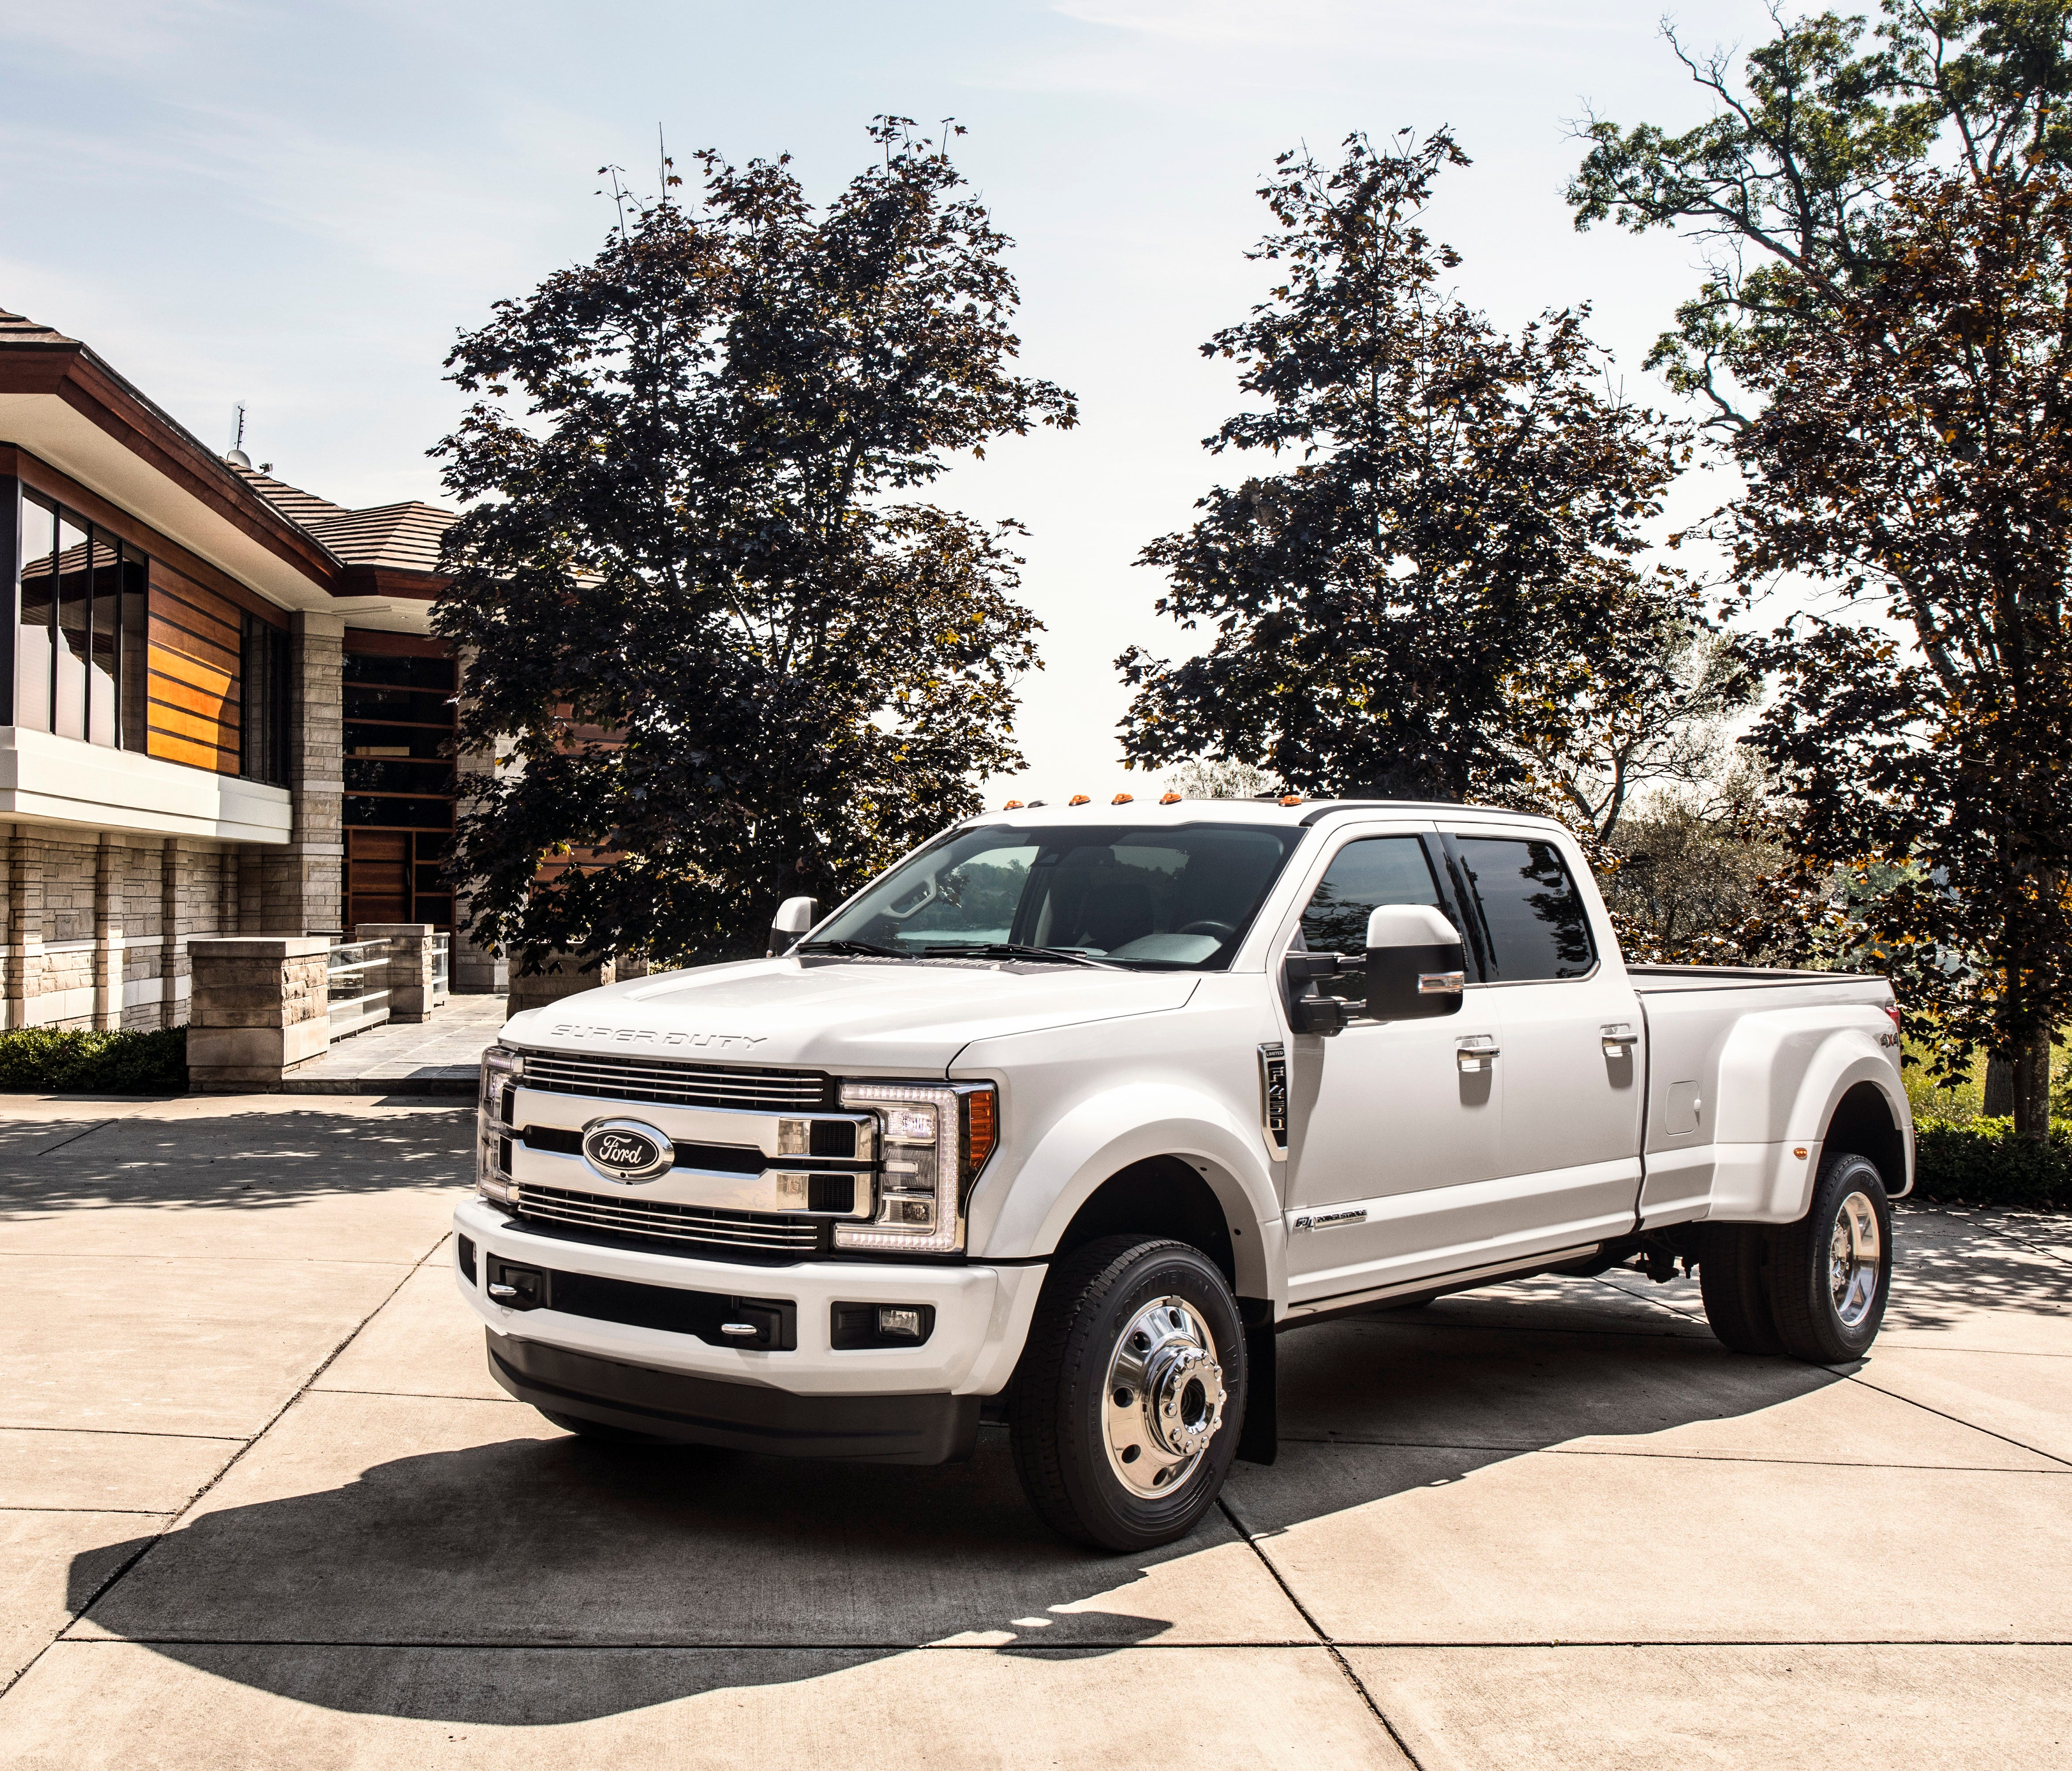 The 2018 Ford F-Series Super Duty Limited pickup truck.